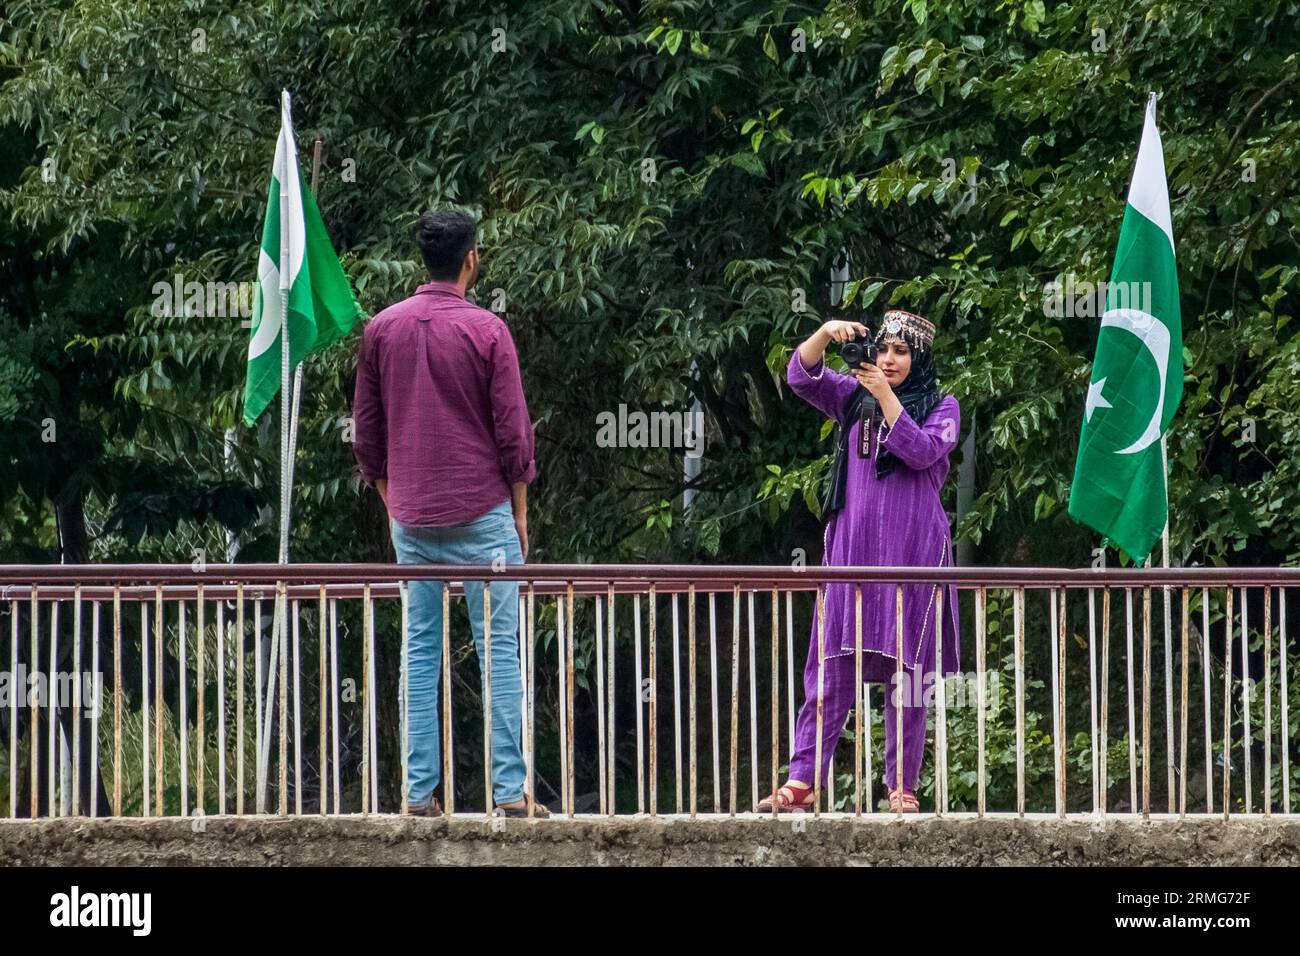 A woman in Pakistan Administered Kashmir seen taking photos of a man in-front of Pakistani flag on the banks of Neelam river or Kishan Ganga that has divided Kashmir into two parts controlled by nuclear rivals India and Pakistan. The river acts as a disputed line of control and flows through a village called Keran from both sides which is located on the northern side of Indian Kashmir's Border district Kupwara some 150kms from Srinagar and 93kms from Muzaffarabad, in the Pakistan side of Kashmir. (Photo by Faisal Bashir/SOPA Images/Sipa USA) Stock Photo